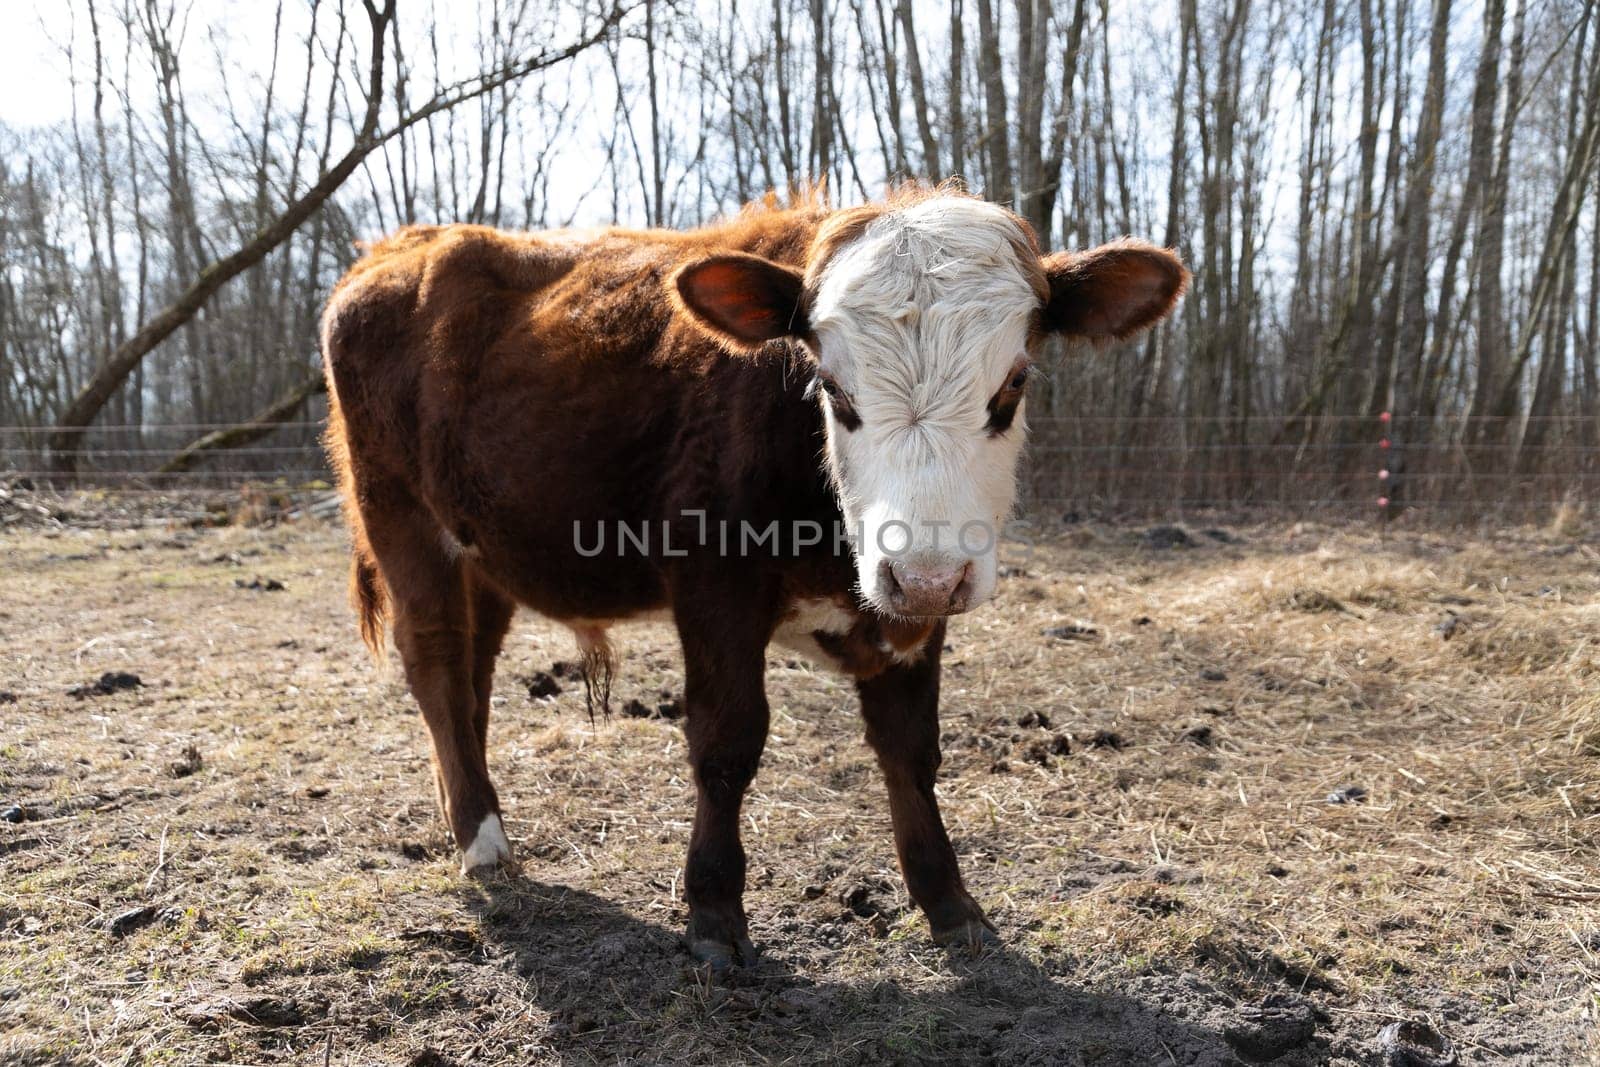 A brown and white cow stands atop a dry grass field, its hooves firmly planted on the ground. The cow looks around the surroundings, grazing peacefully in its natural habitat.